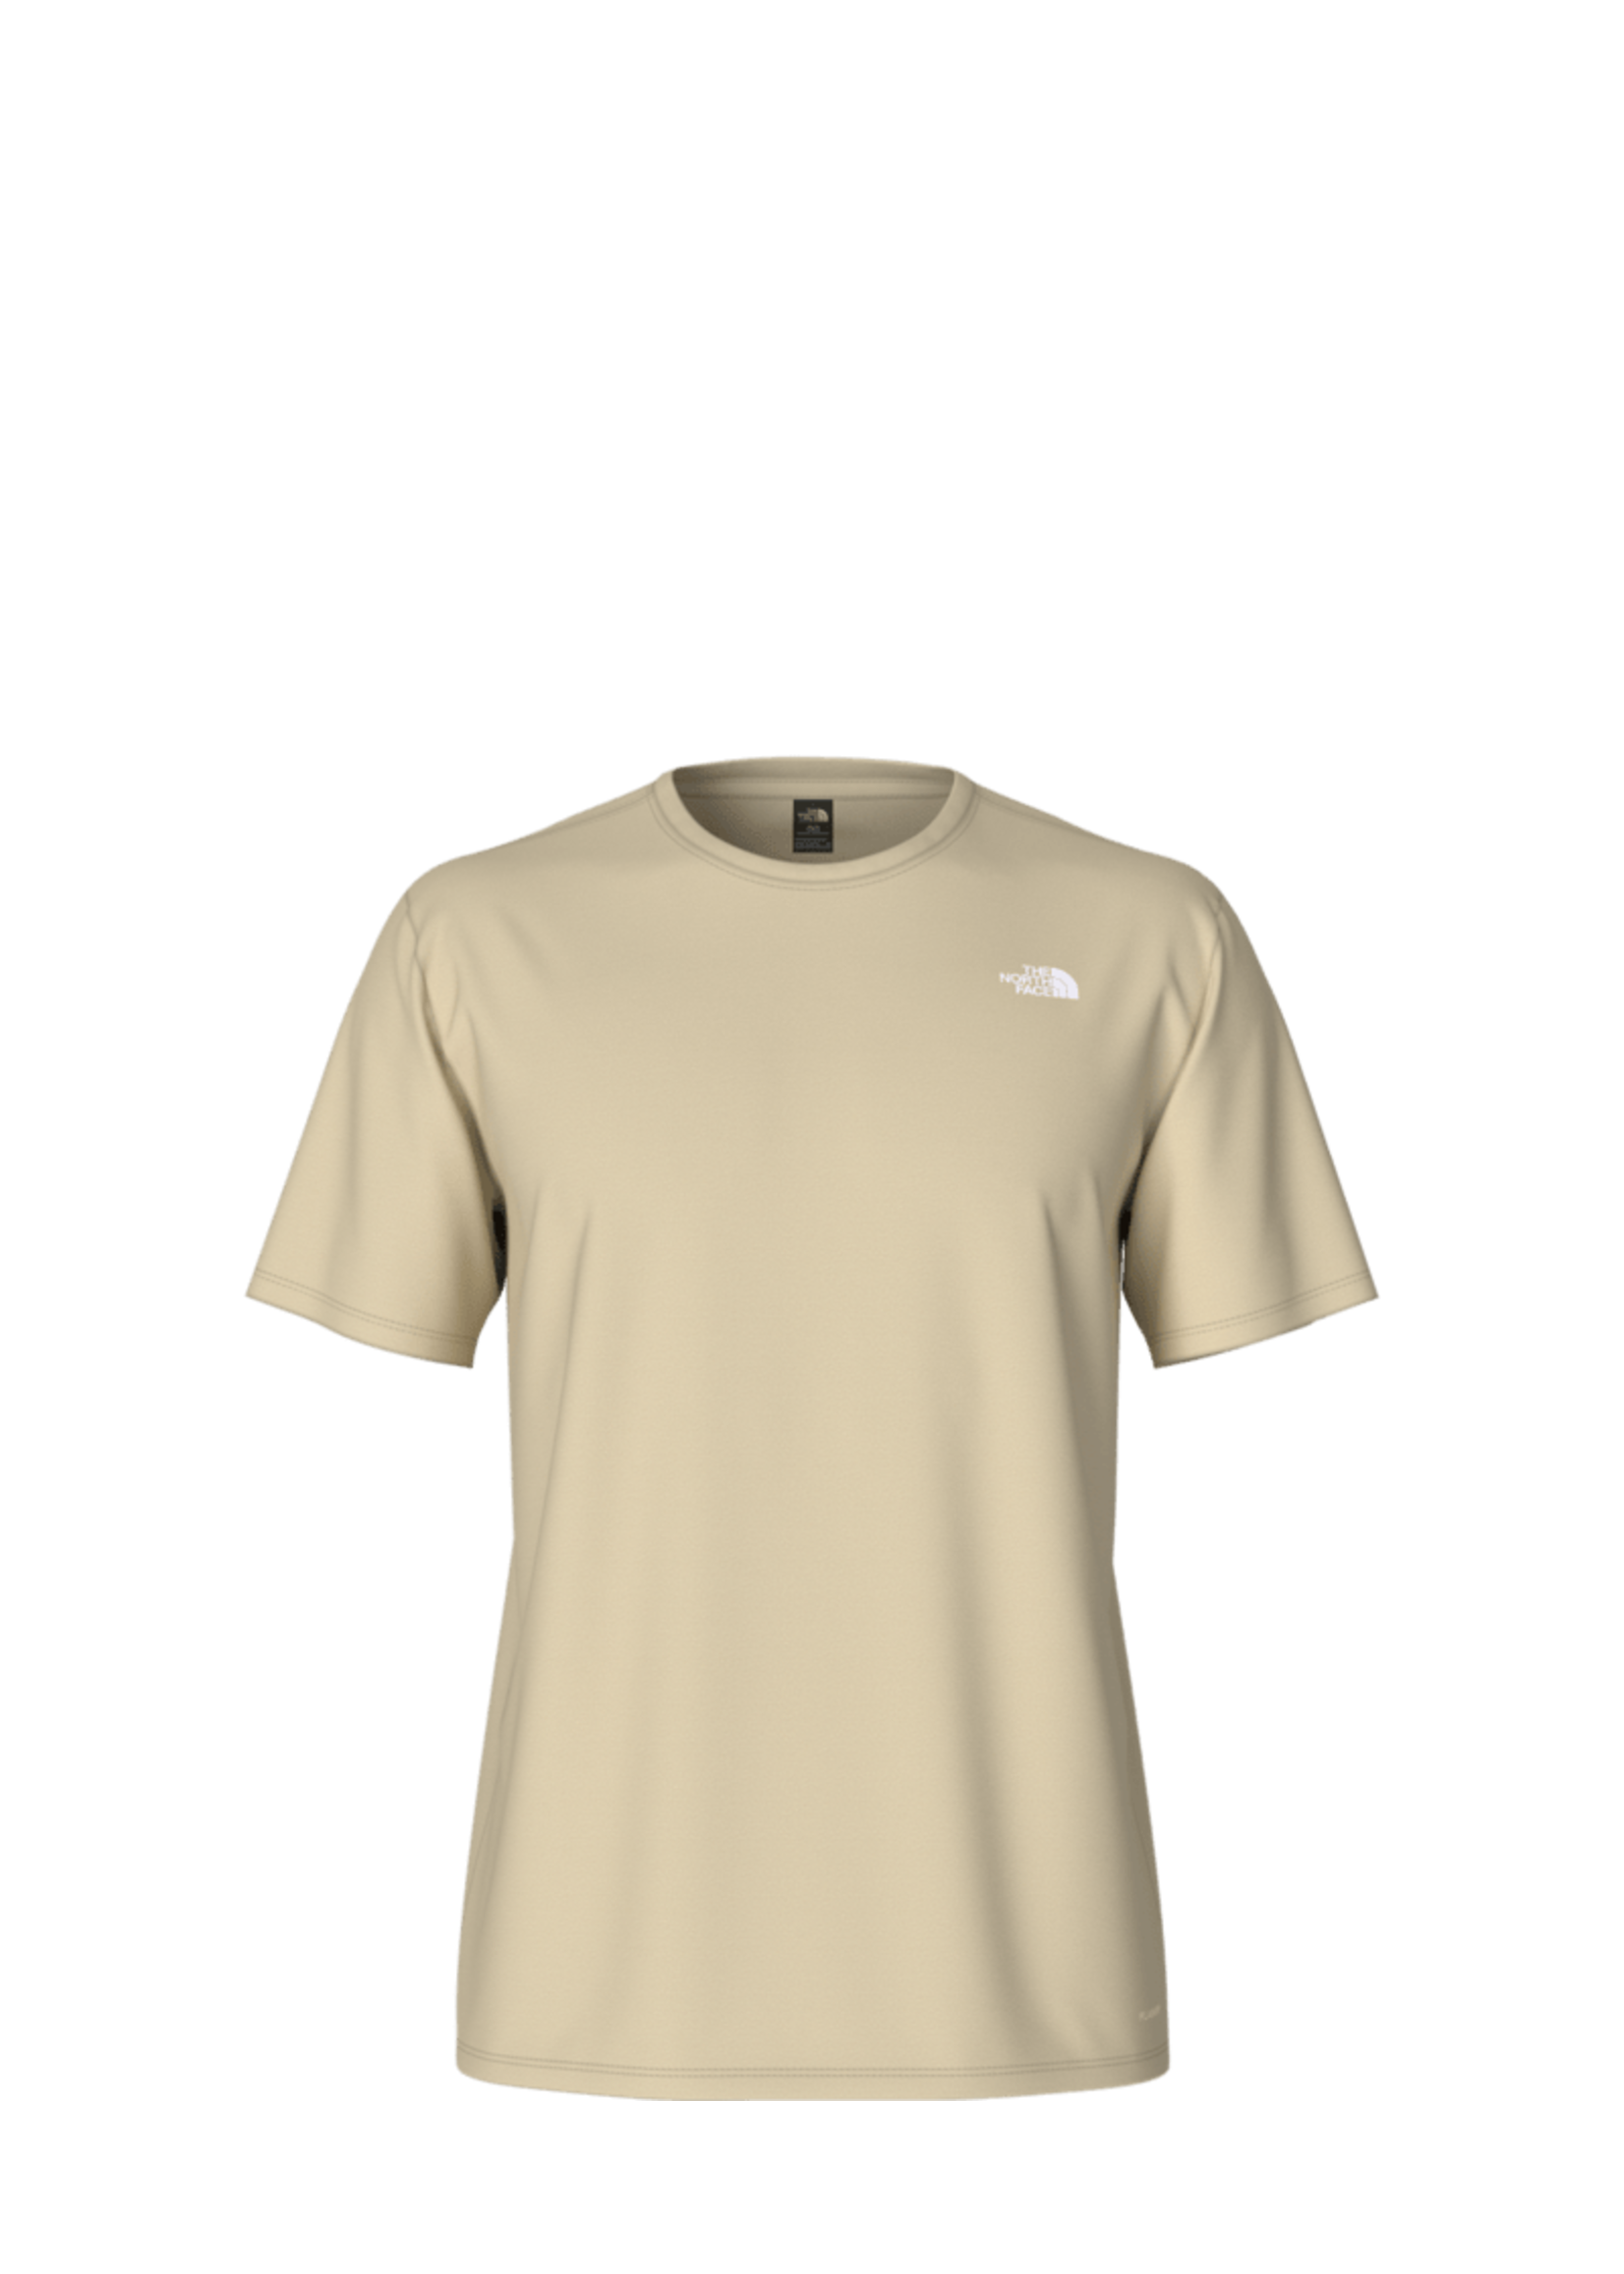 The North Face Men's Elevation Short-Sleeve Tee - Gravel